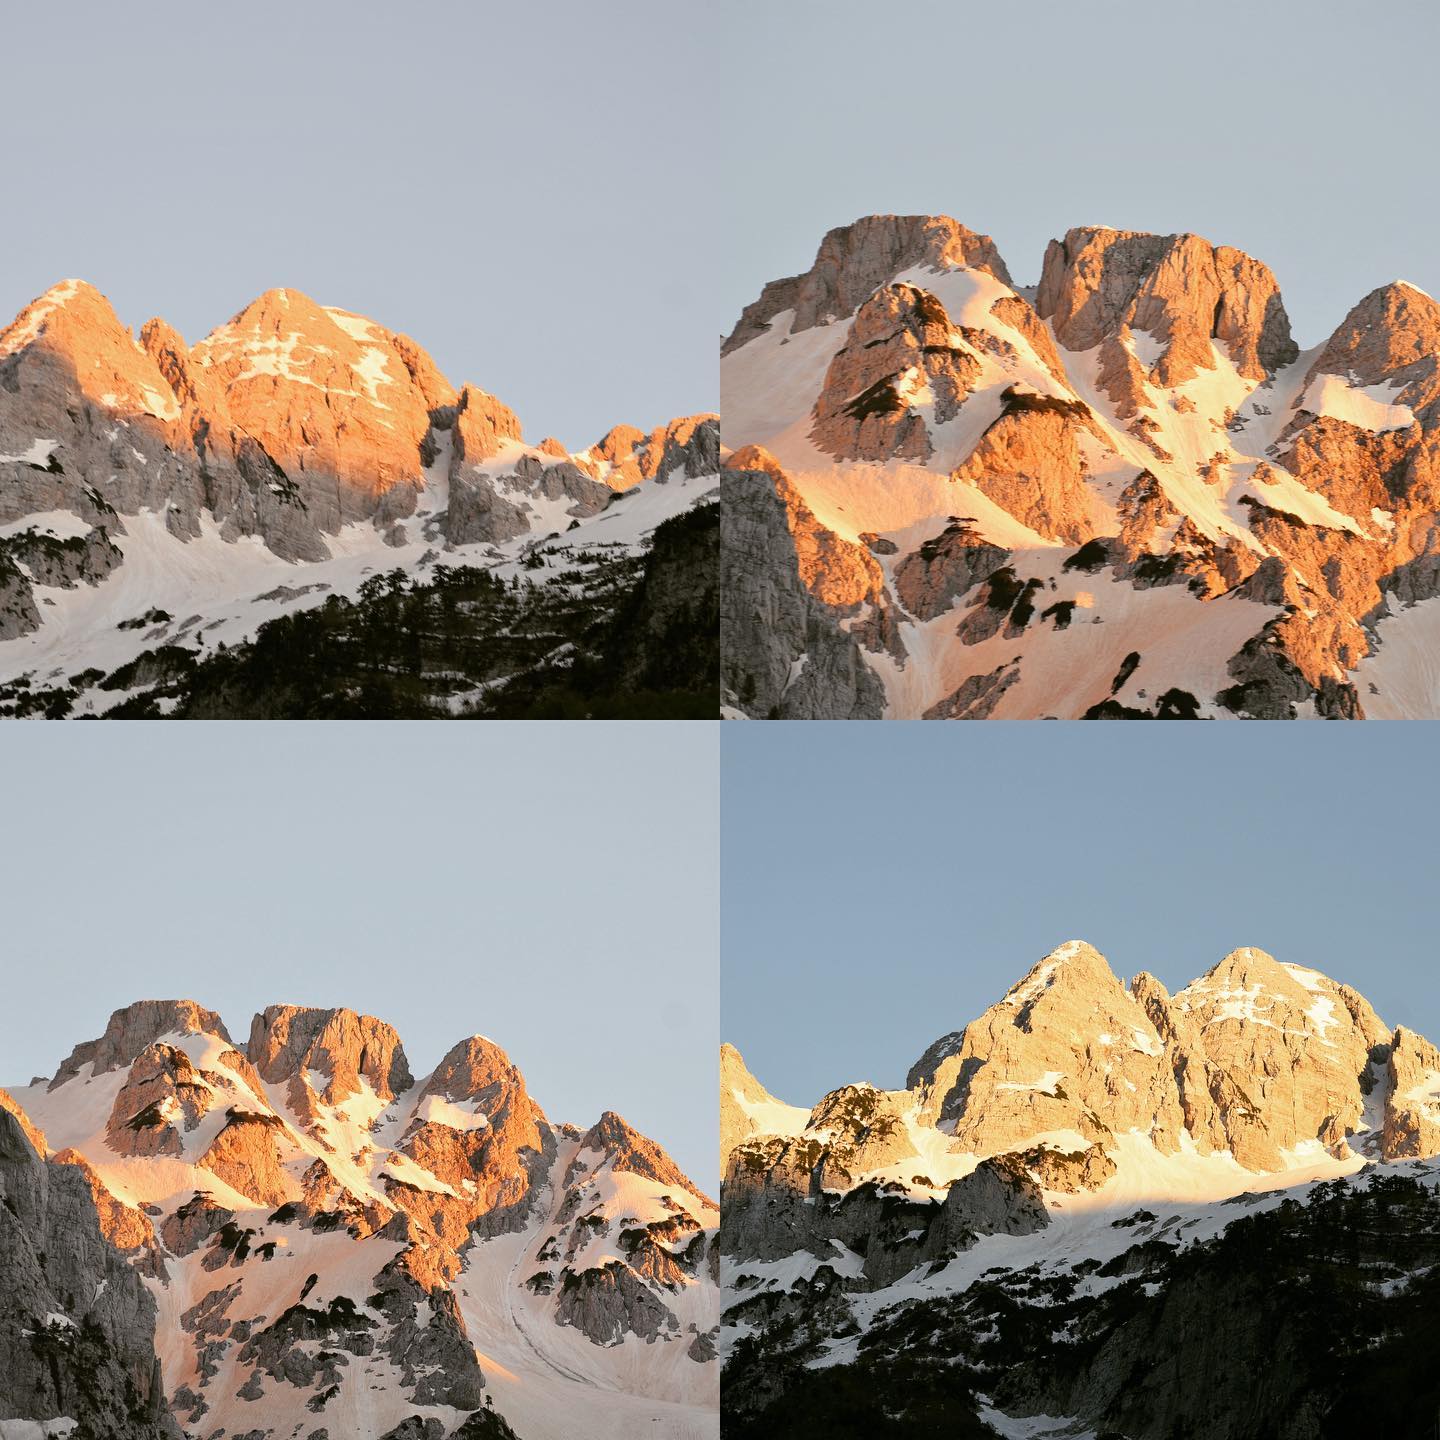 Albanian Alps 🧡 Still quite some snow in May which made it impossible for us to take longer hikes but these evening views while eating dinner and chilling after a long day were so worth driving up to these parts of the country. #valbona #albania